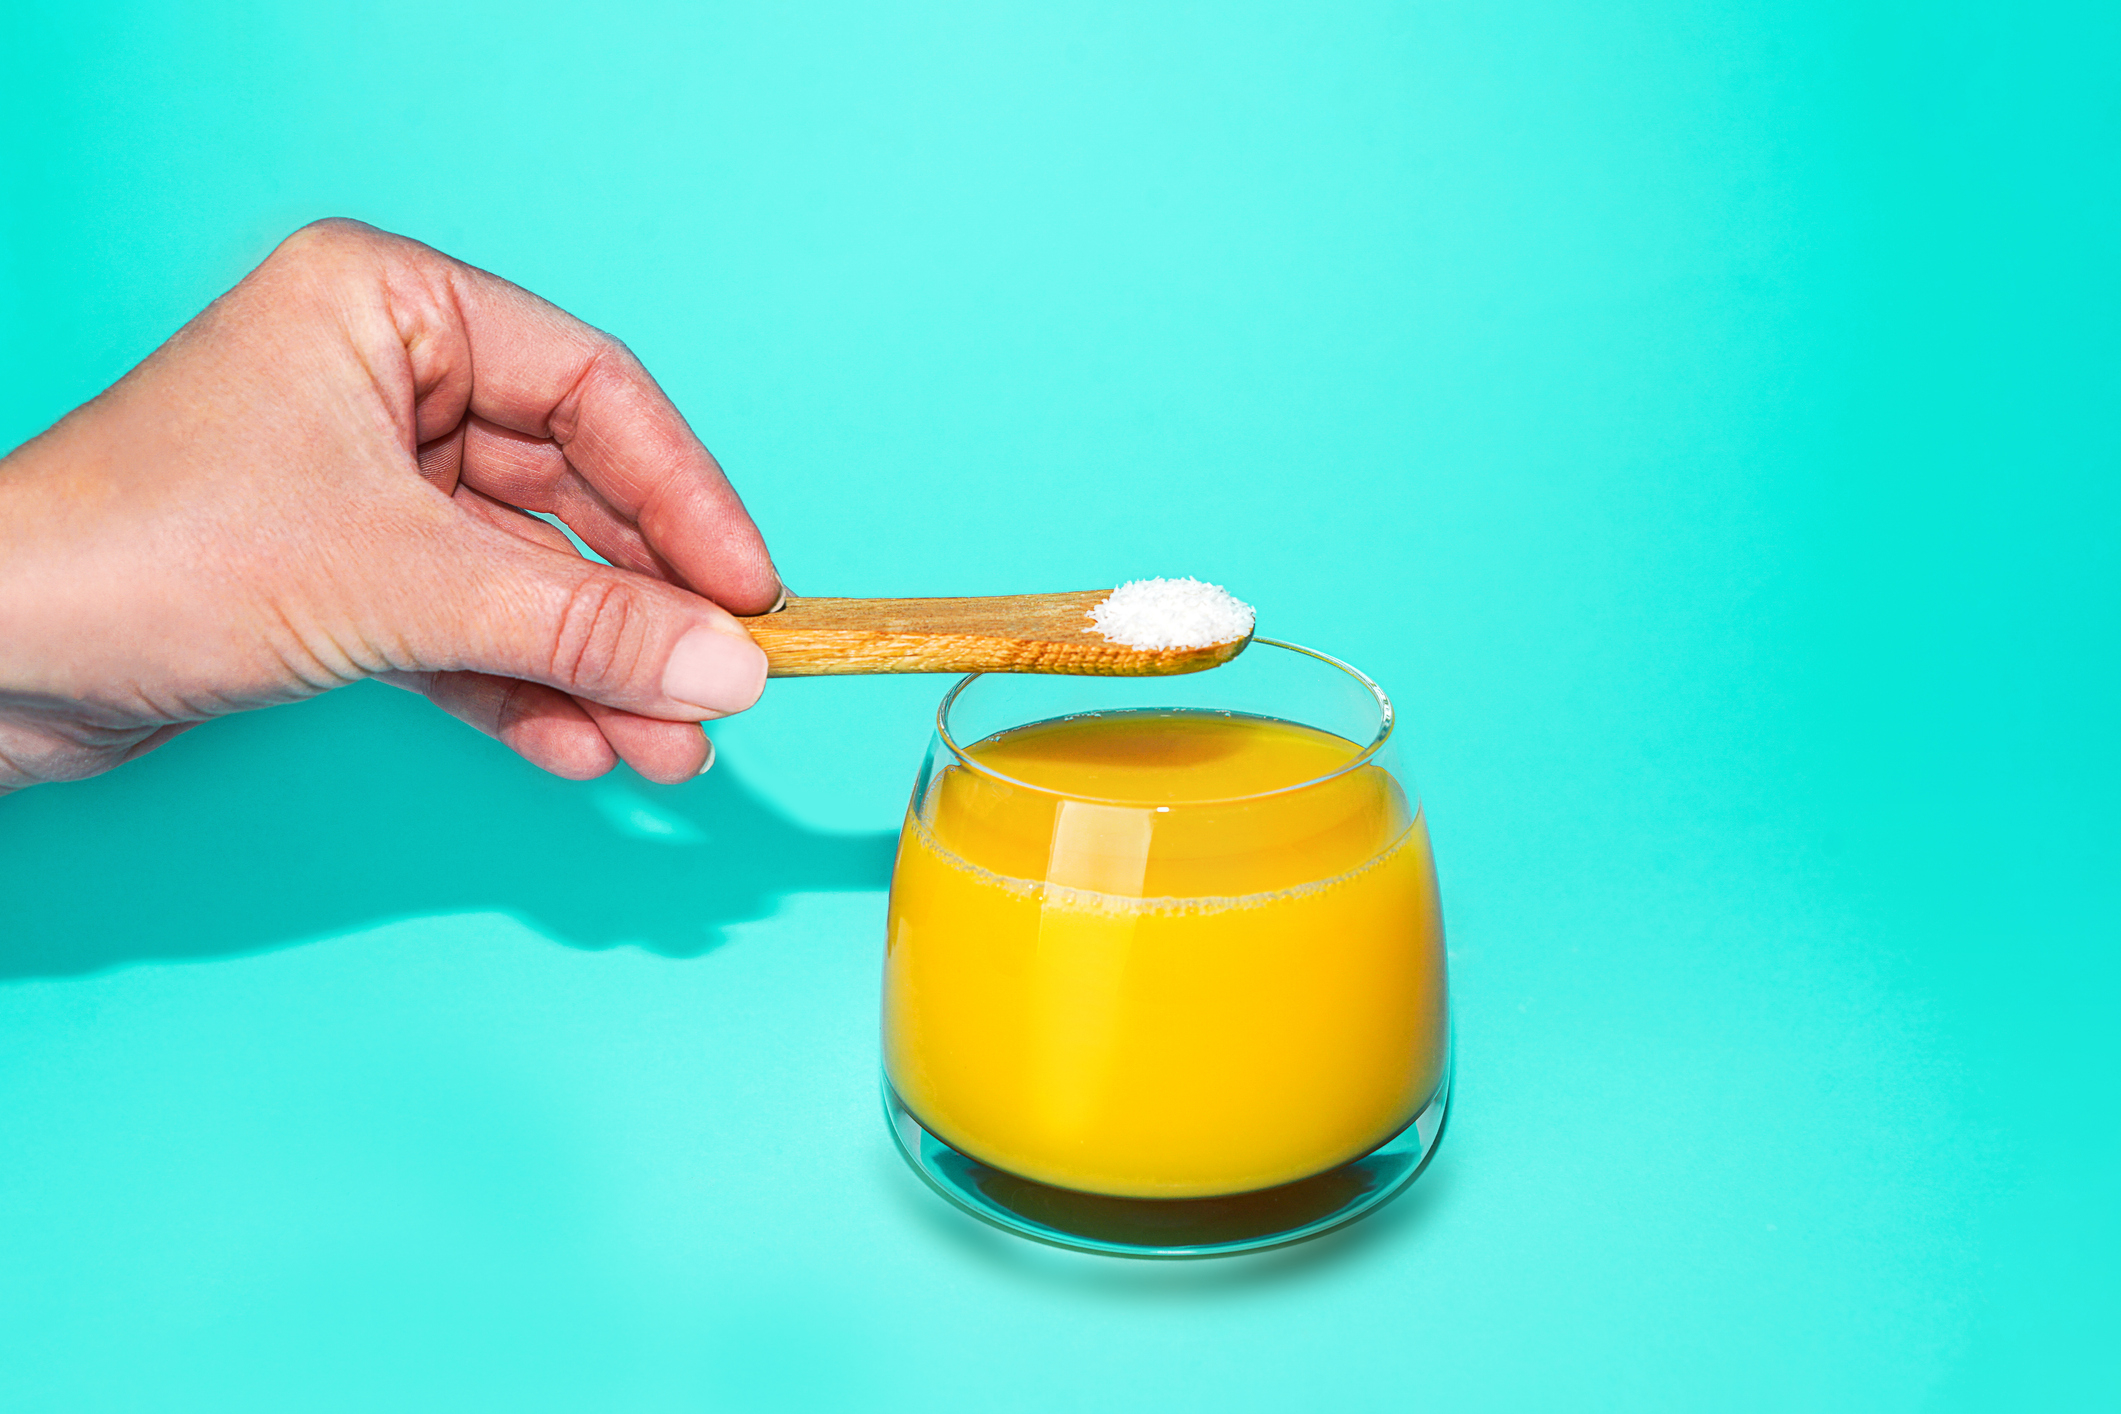 Hand adding a pinch of salt to a glass of orange juice on a turquoise background